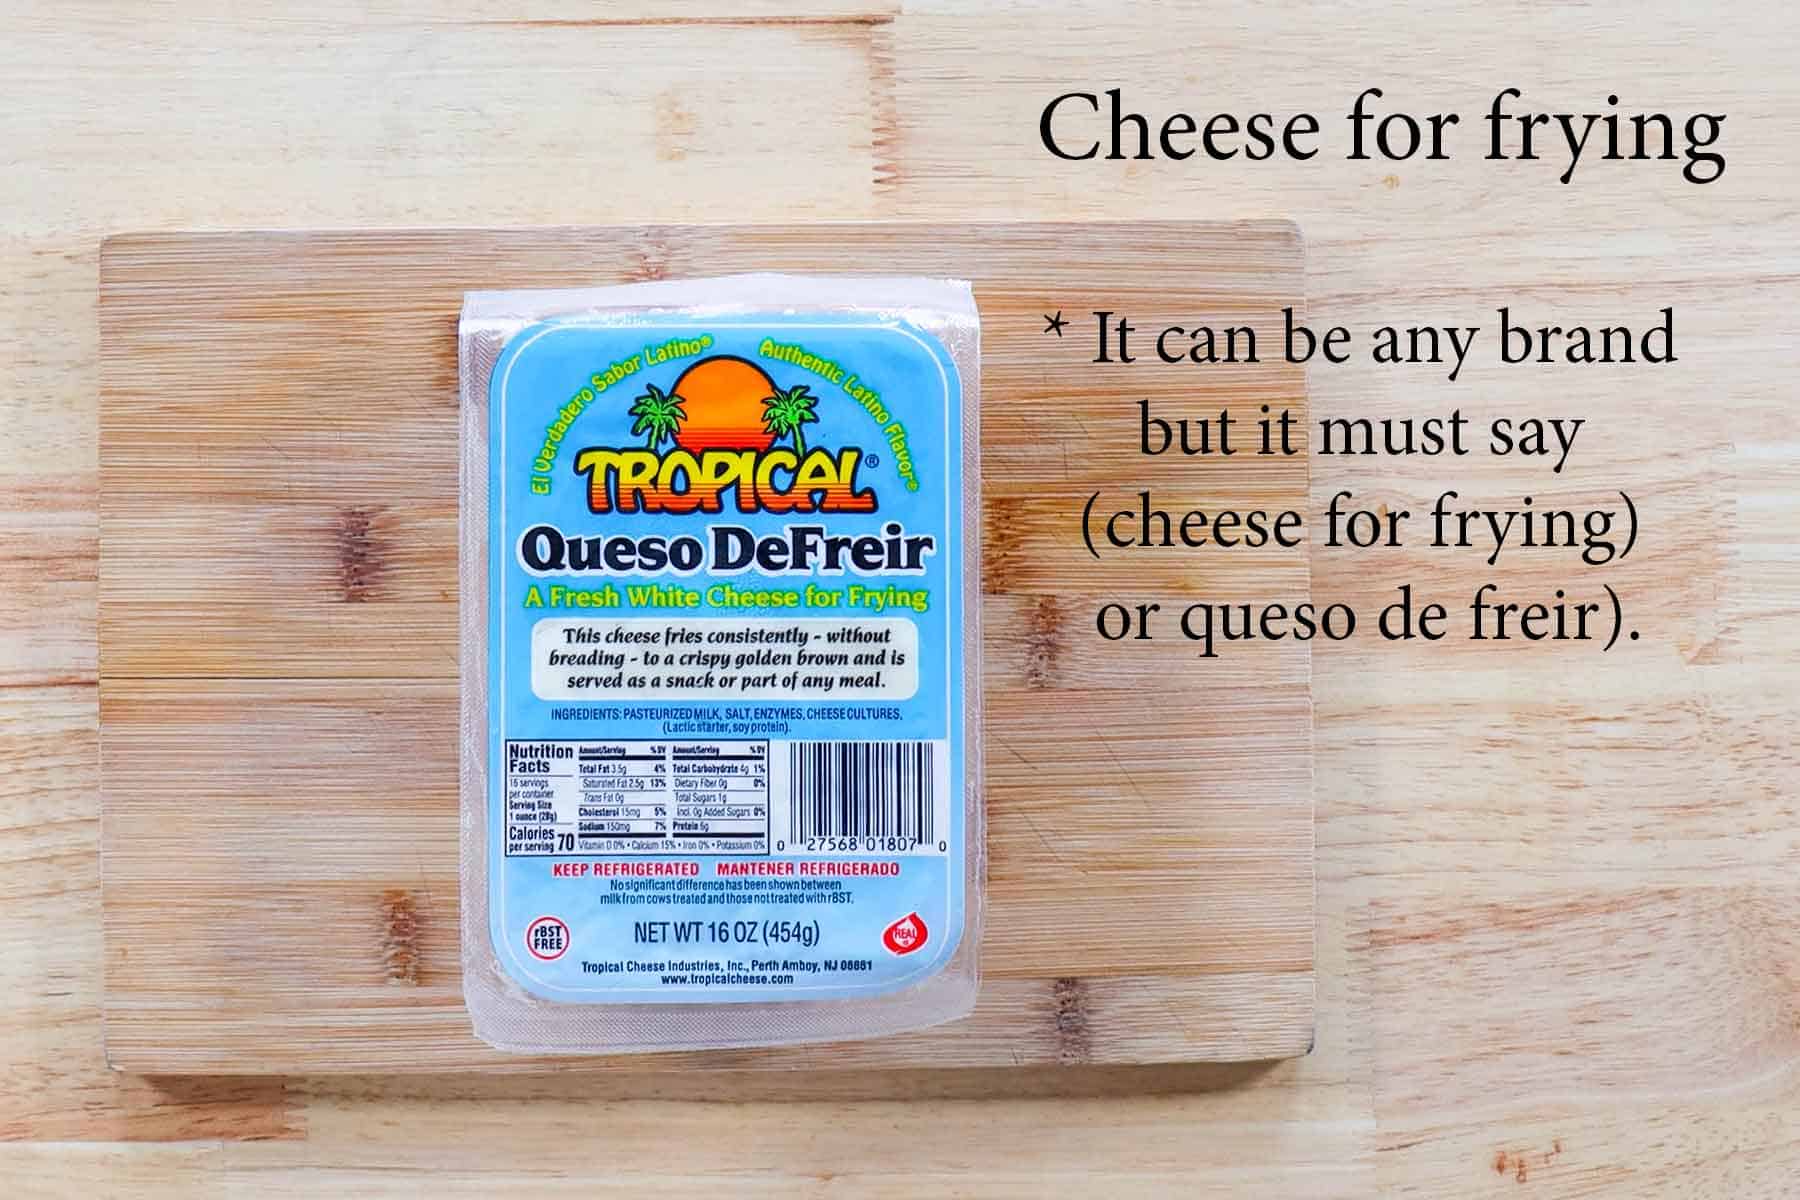 tropical brand cheese for frying image.